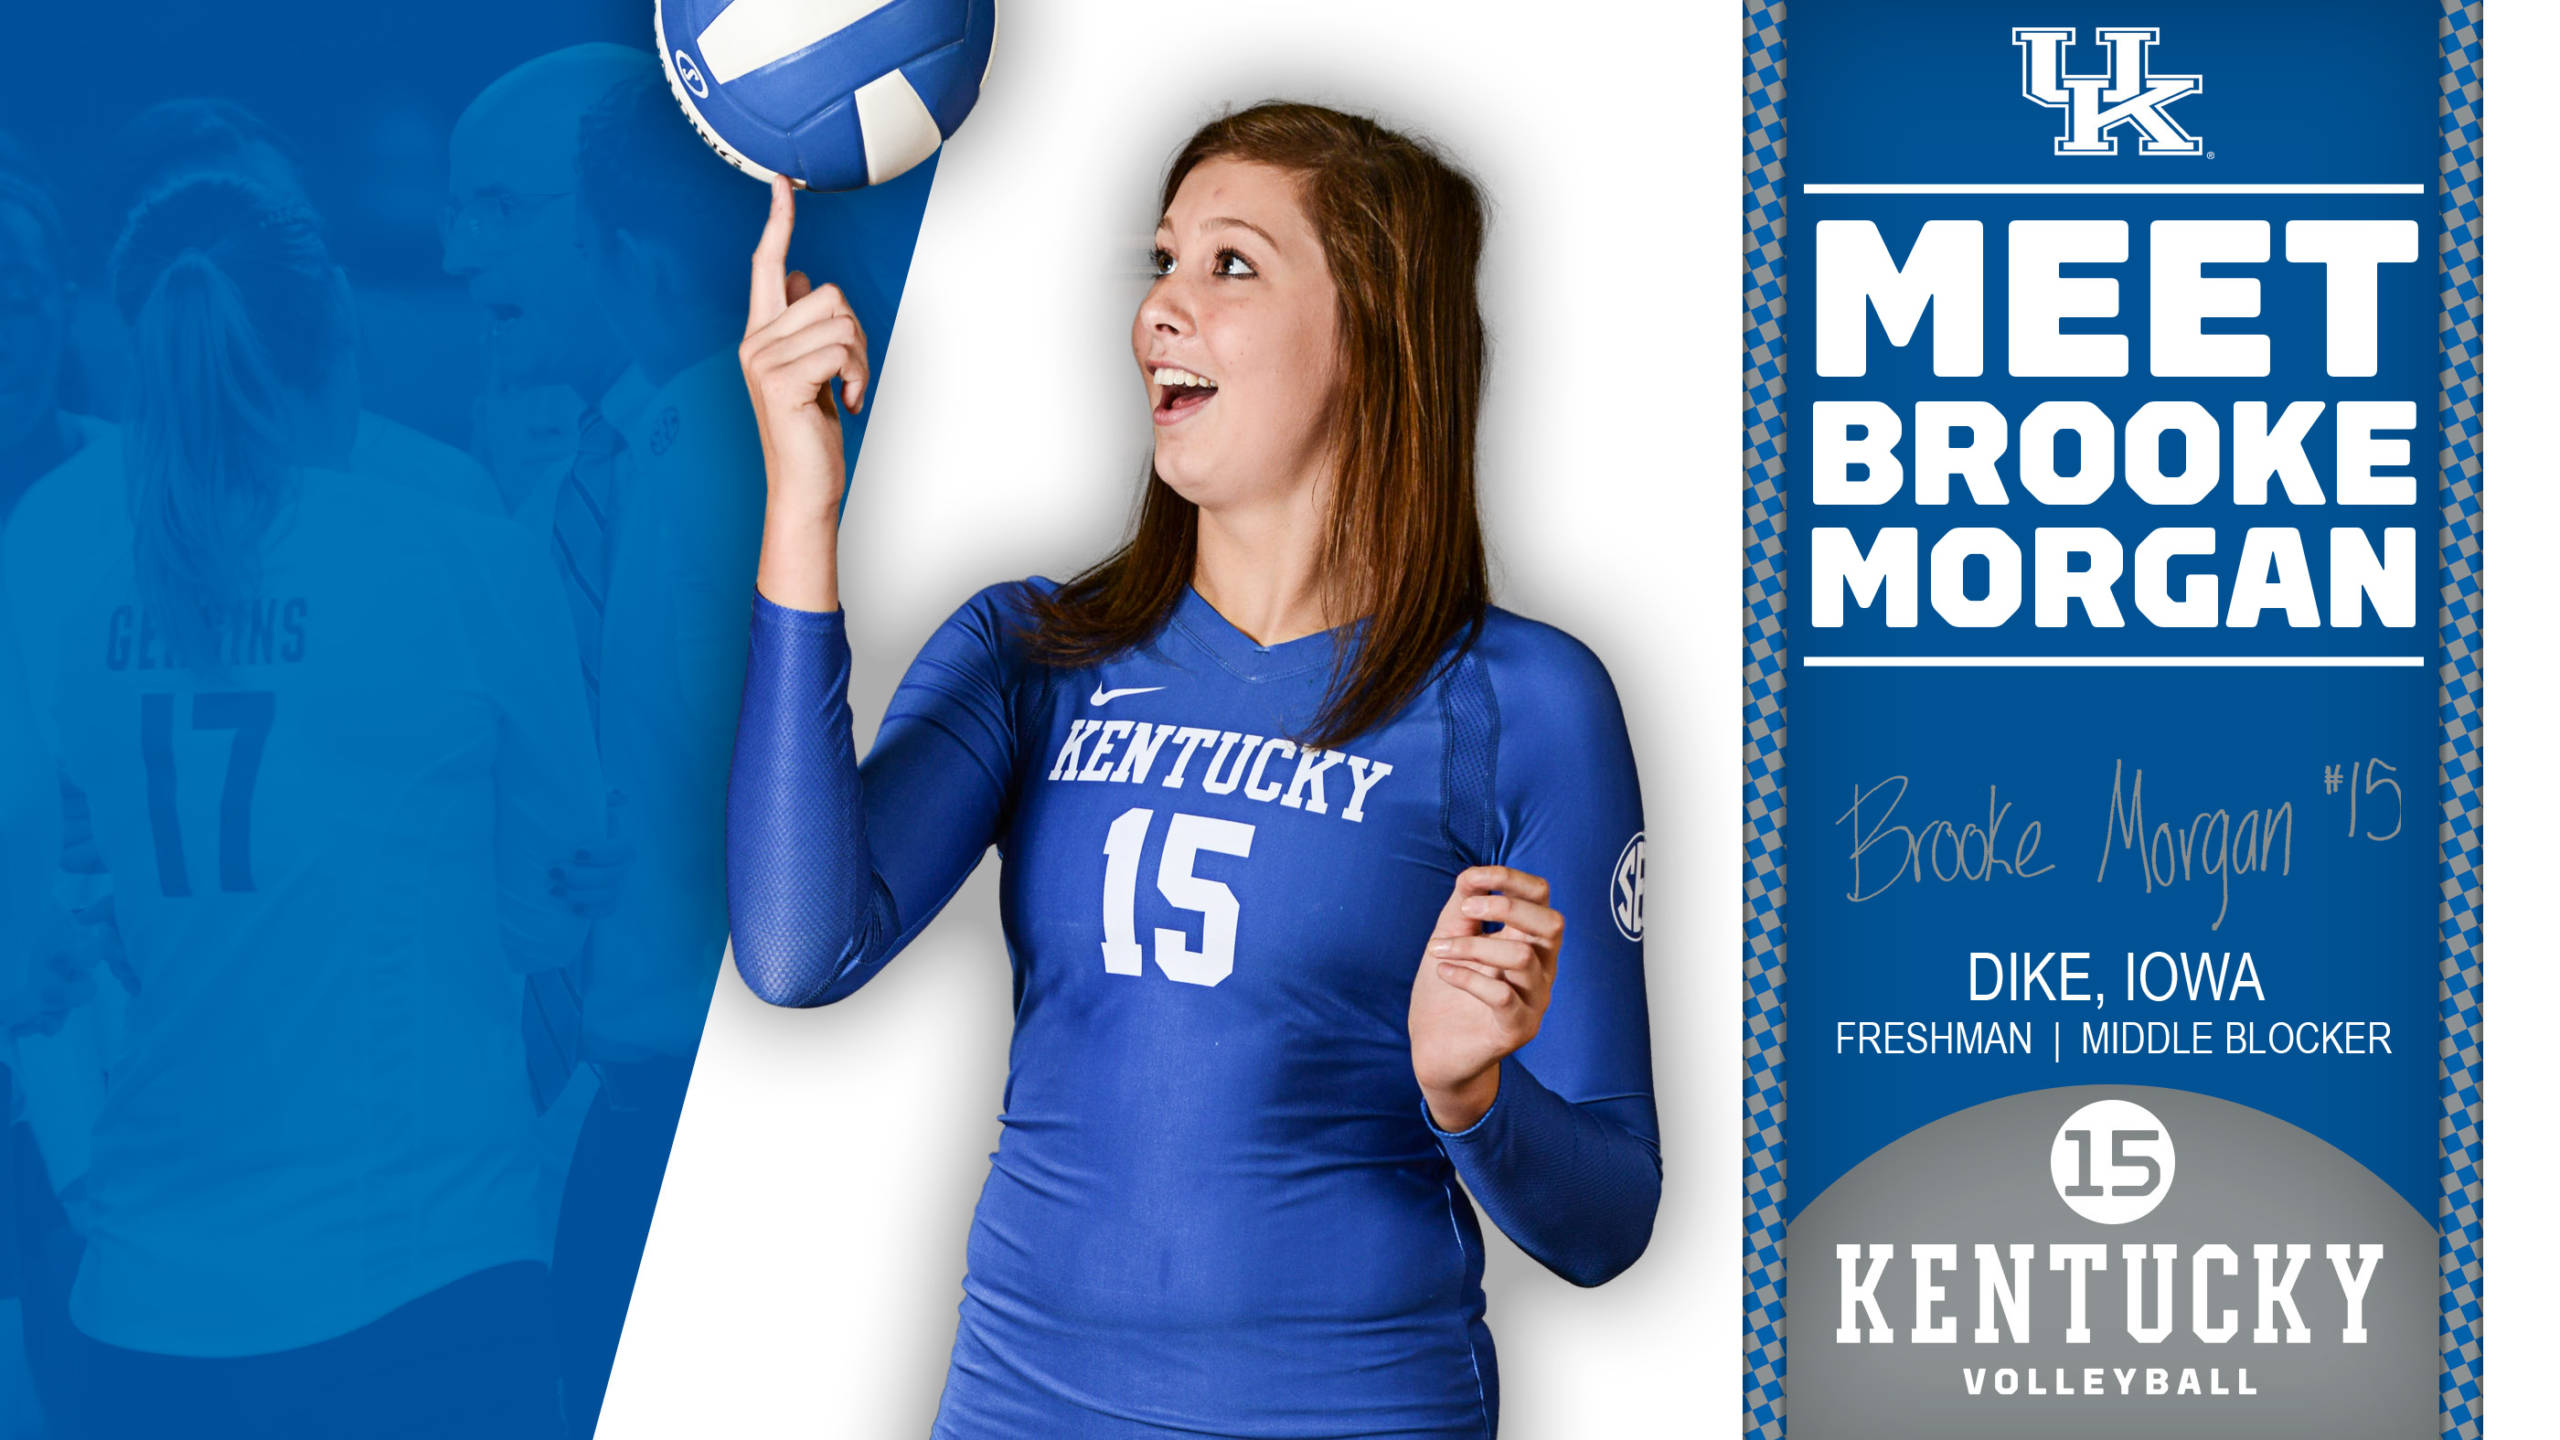 Getting to Know Your Wildcats: Meet Brooke Morgan